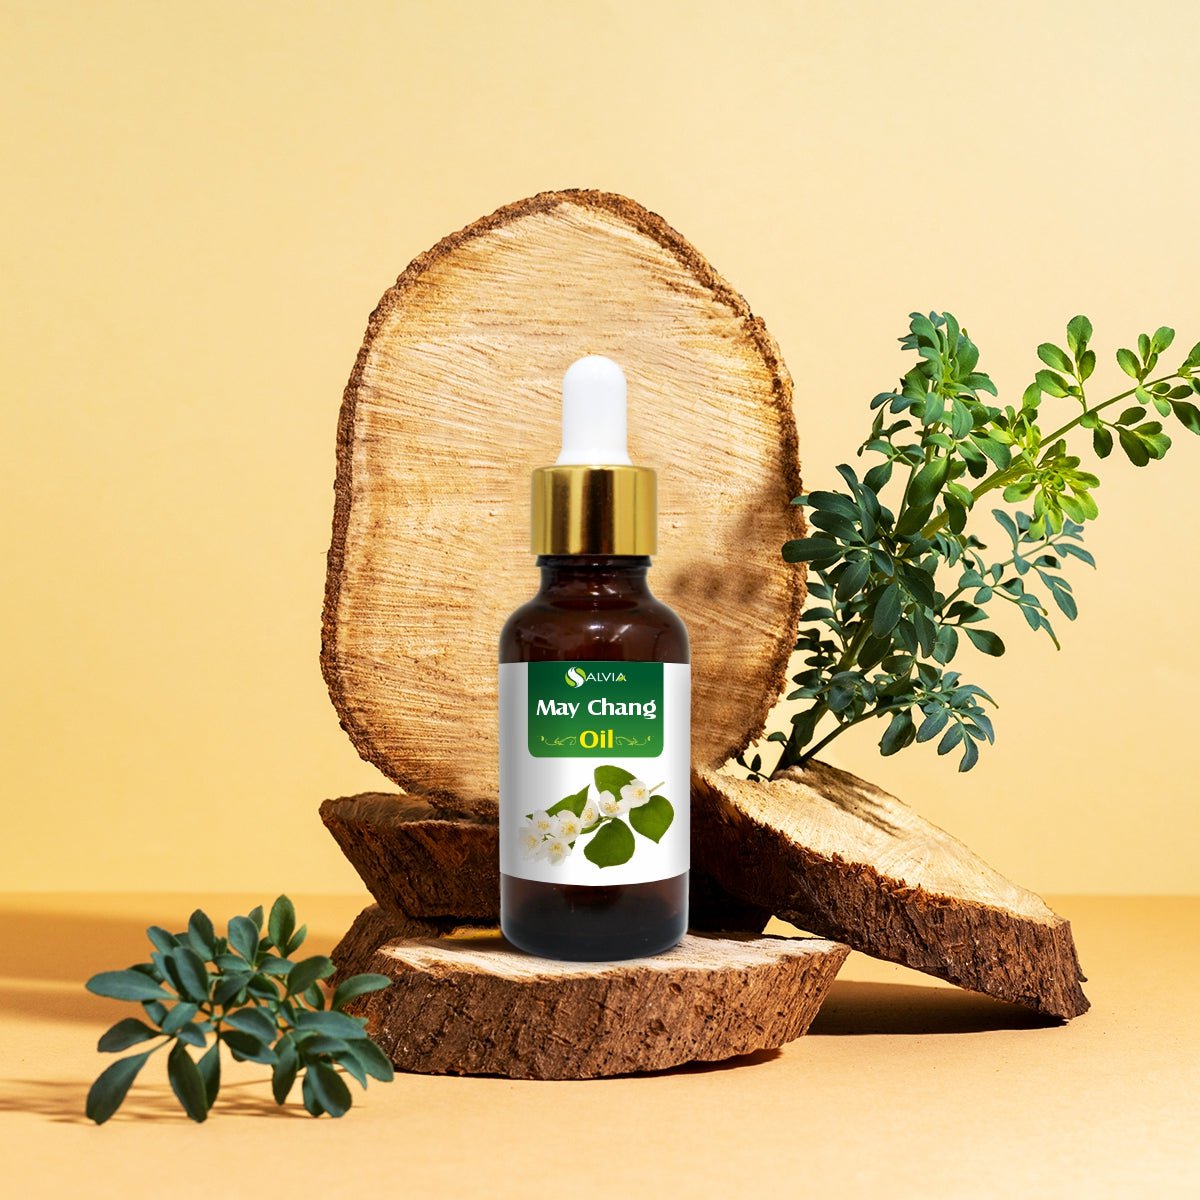 Shoprythm Natural Essential Oils May Chang Oil (Litsea-Cubeba) Pure & Undiluted Essential Oil Refreshes Skin